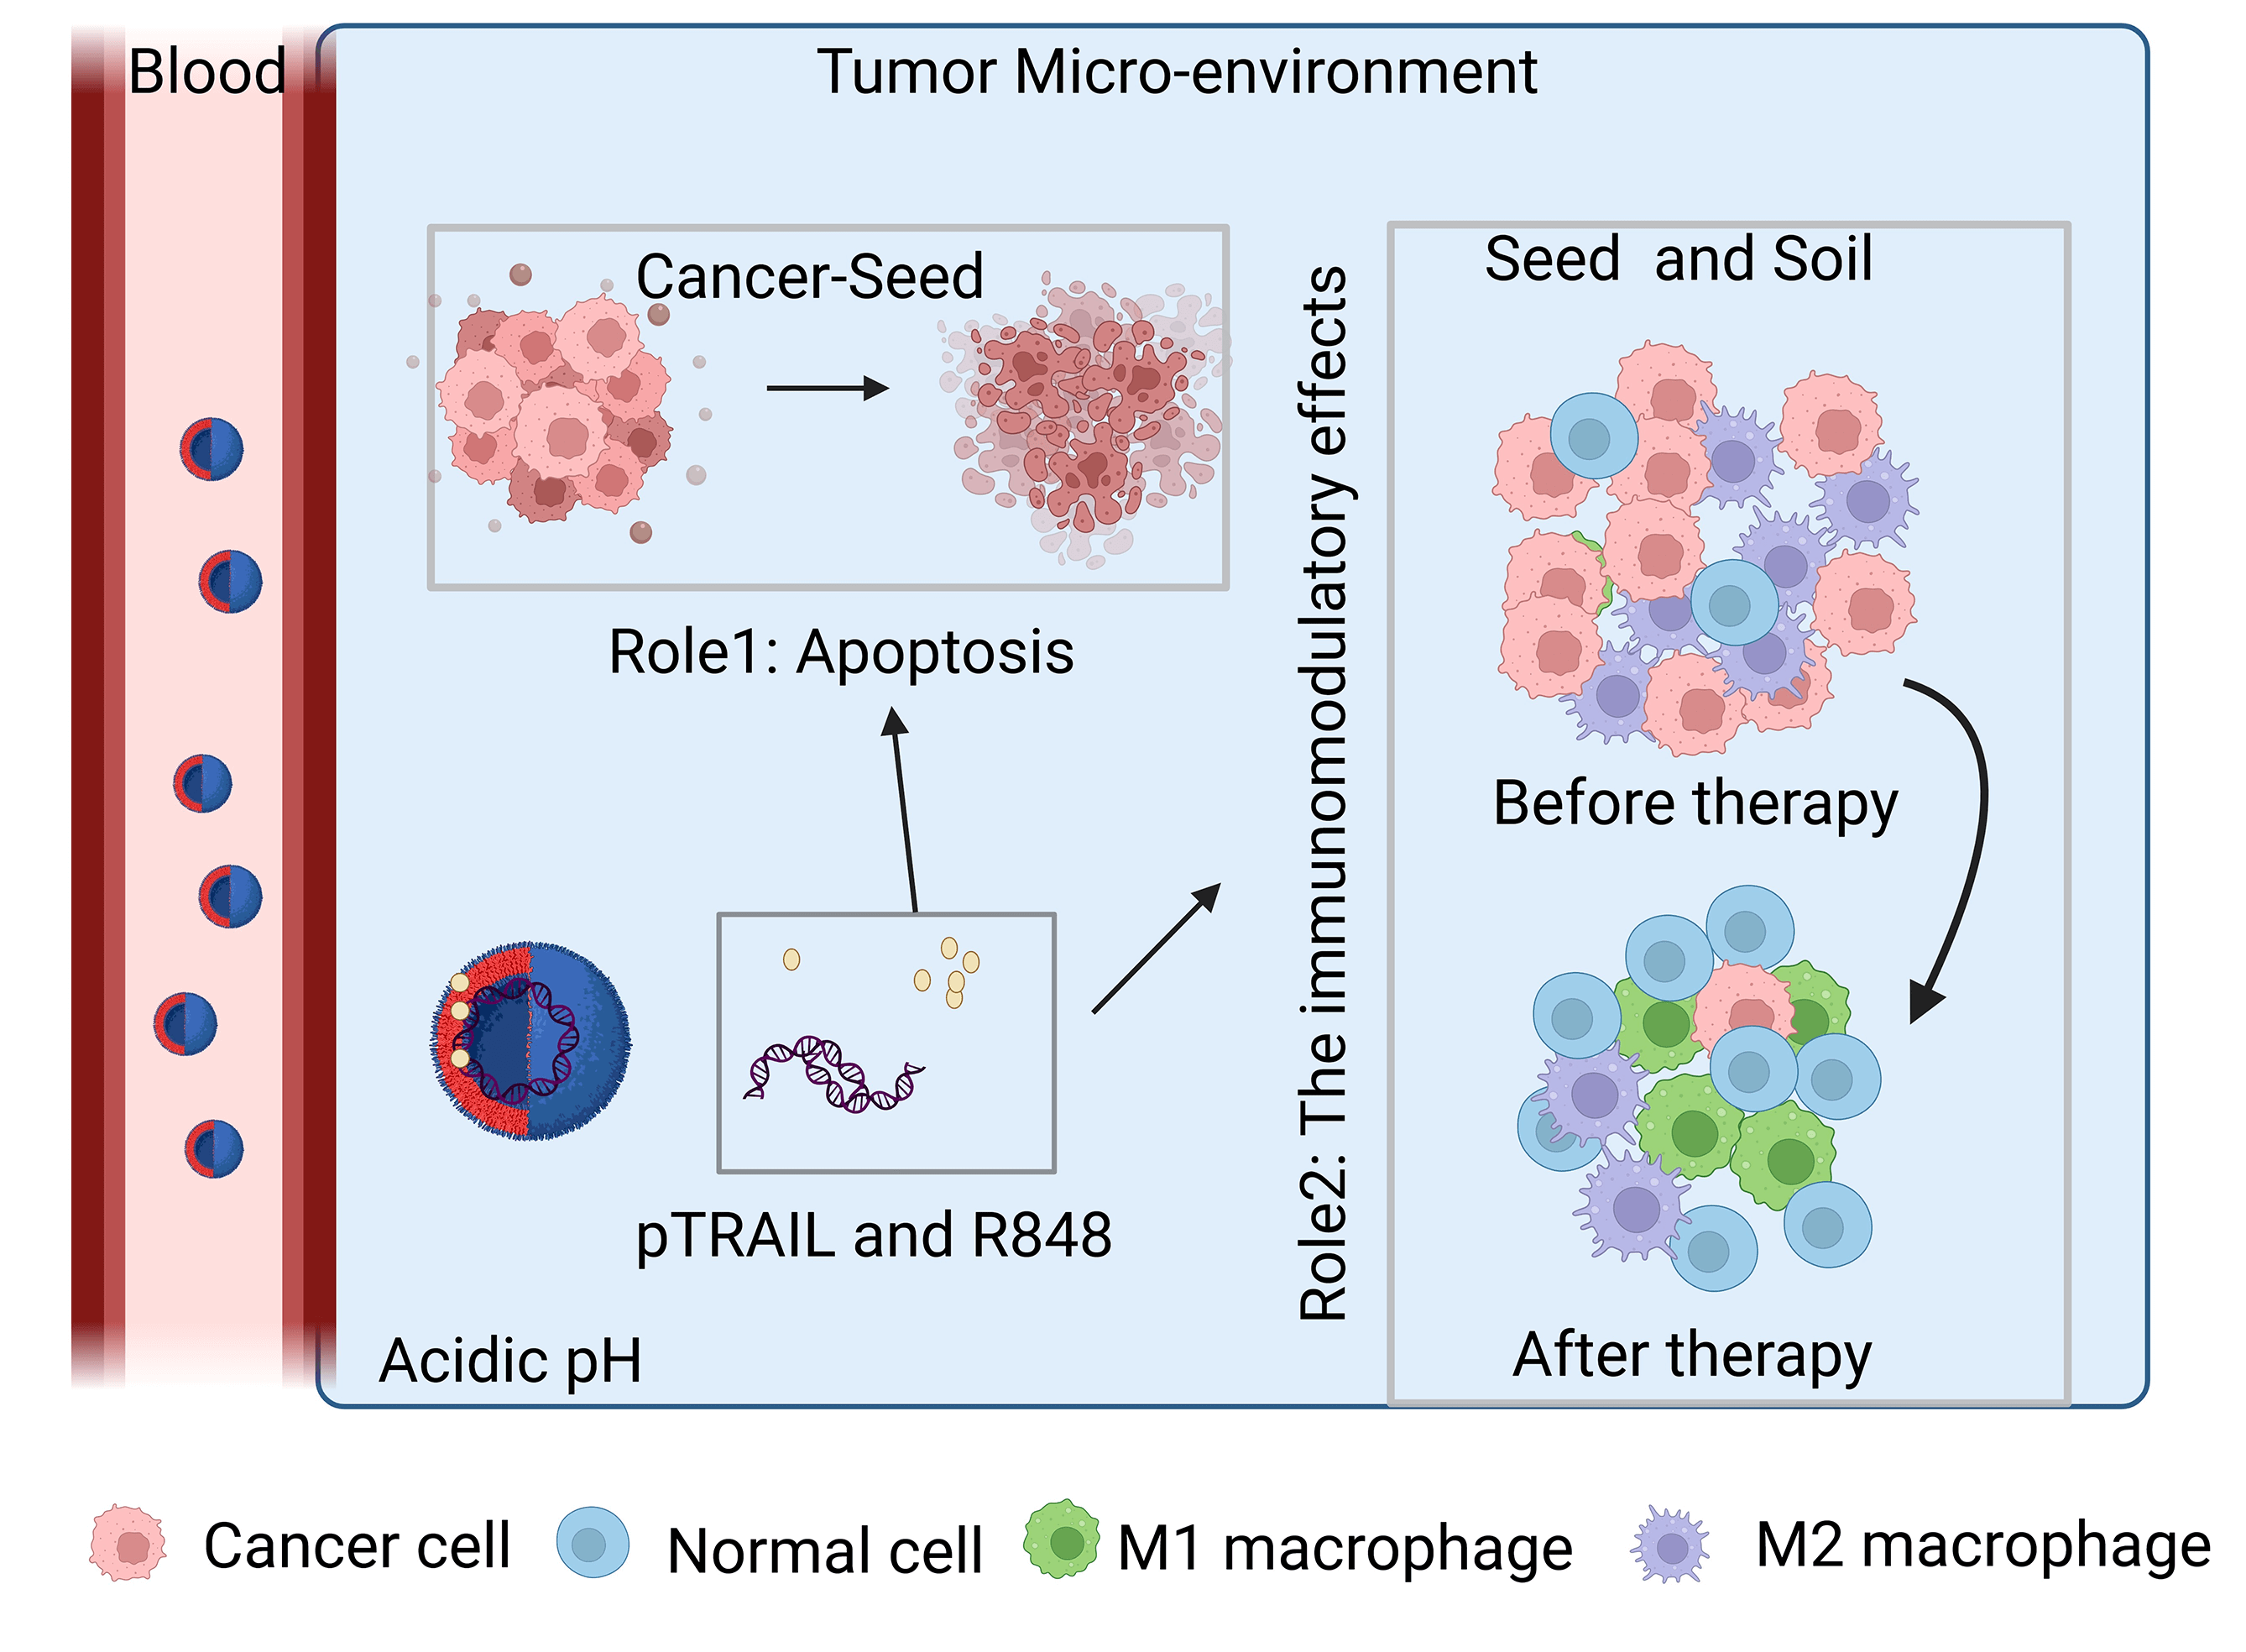 Remodeling tumor microenvironment using pH-sensitive biomimetic co-delivery of TRAIL/R848 liposomes against colorectal cancer